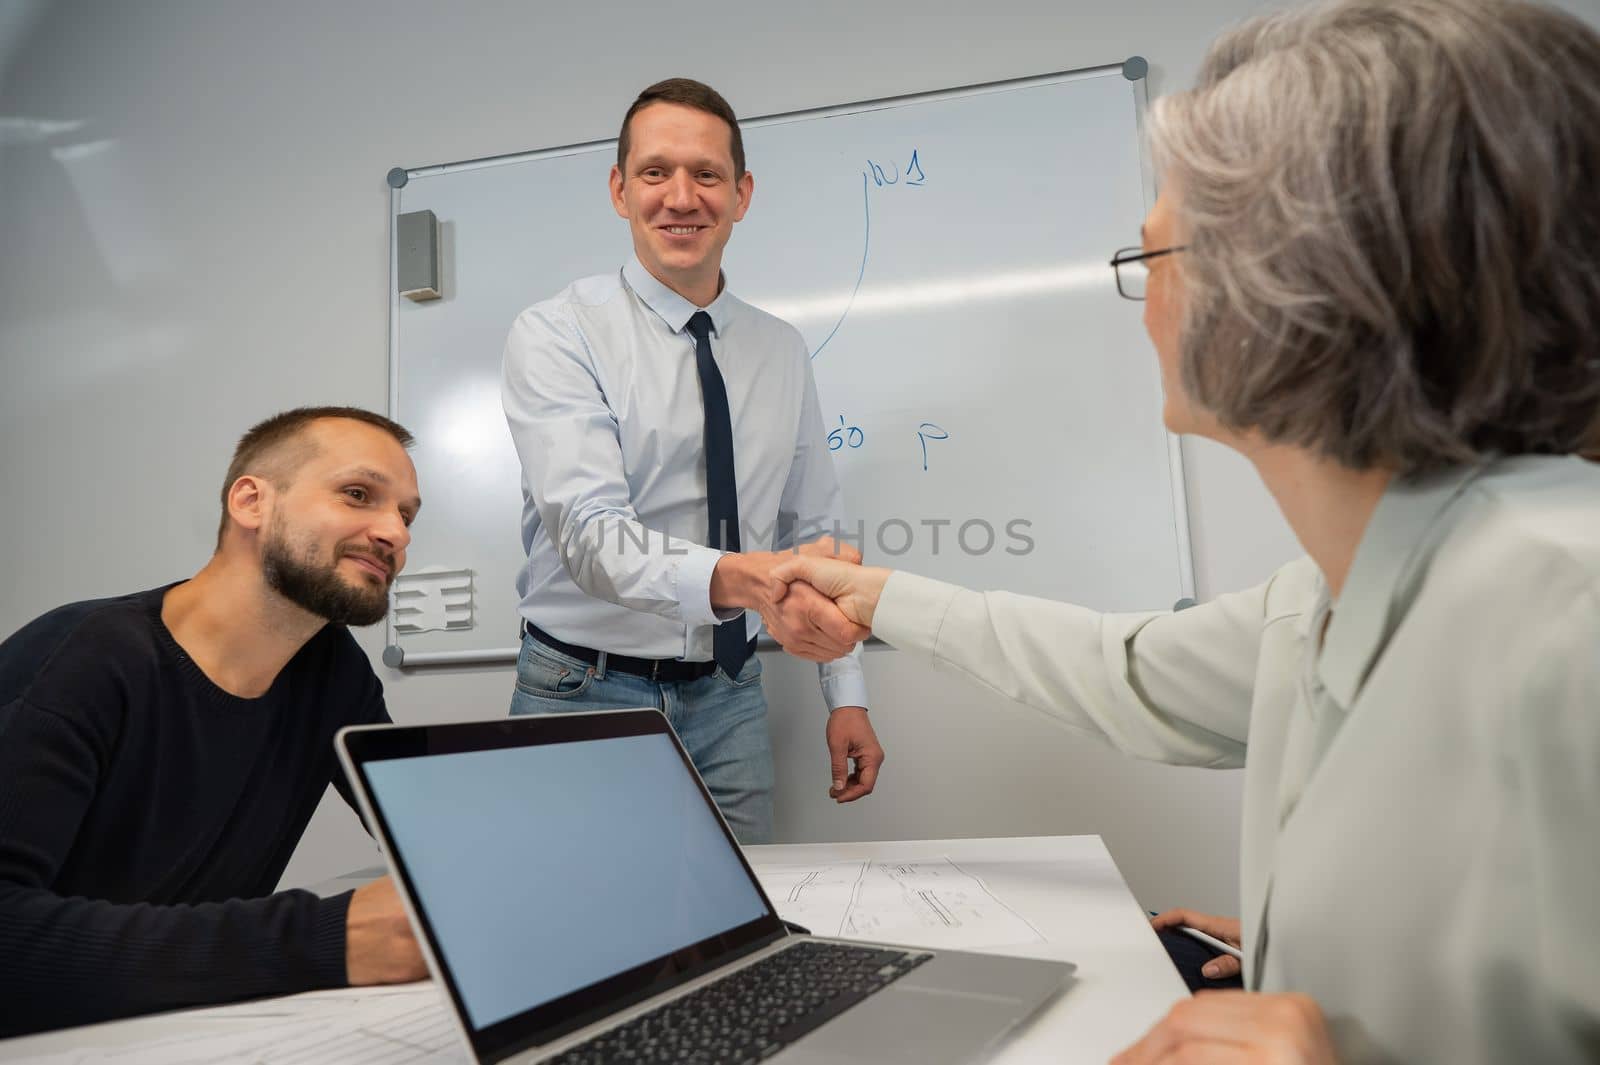 The boss makes a presentation to subordinates at the white board. Caucasian man shaking hands with middle aged woman